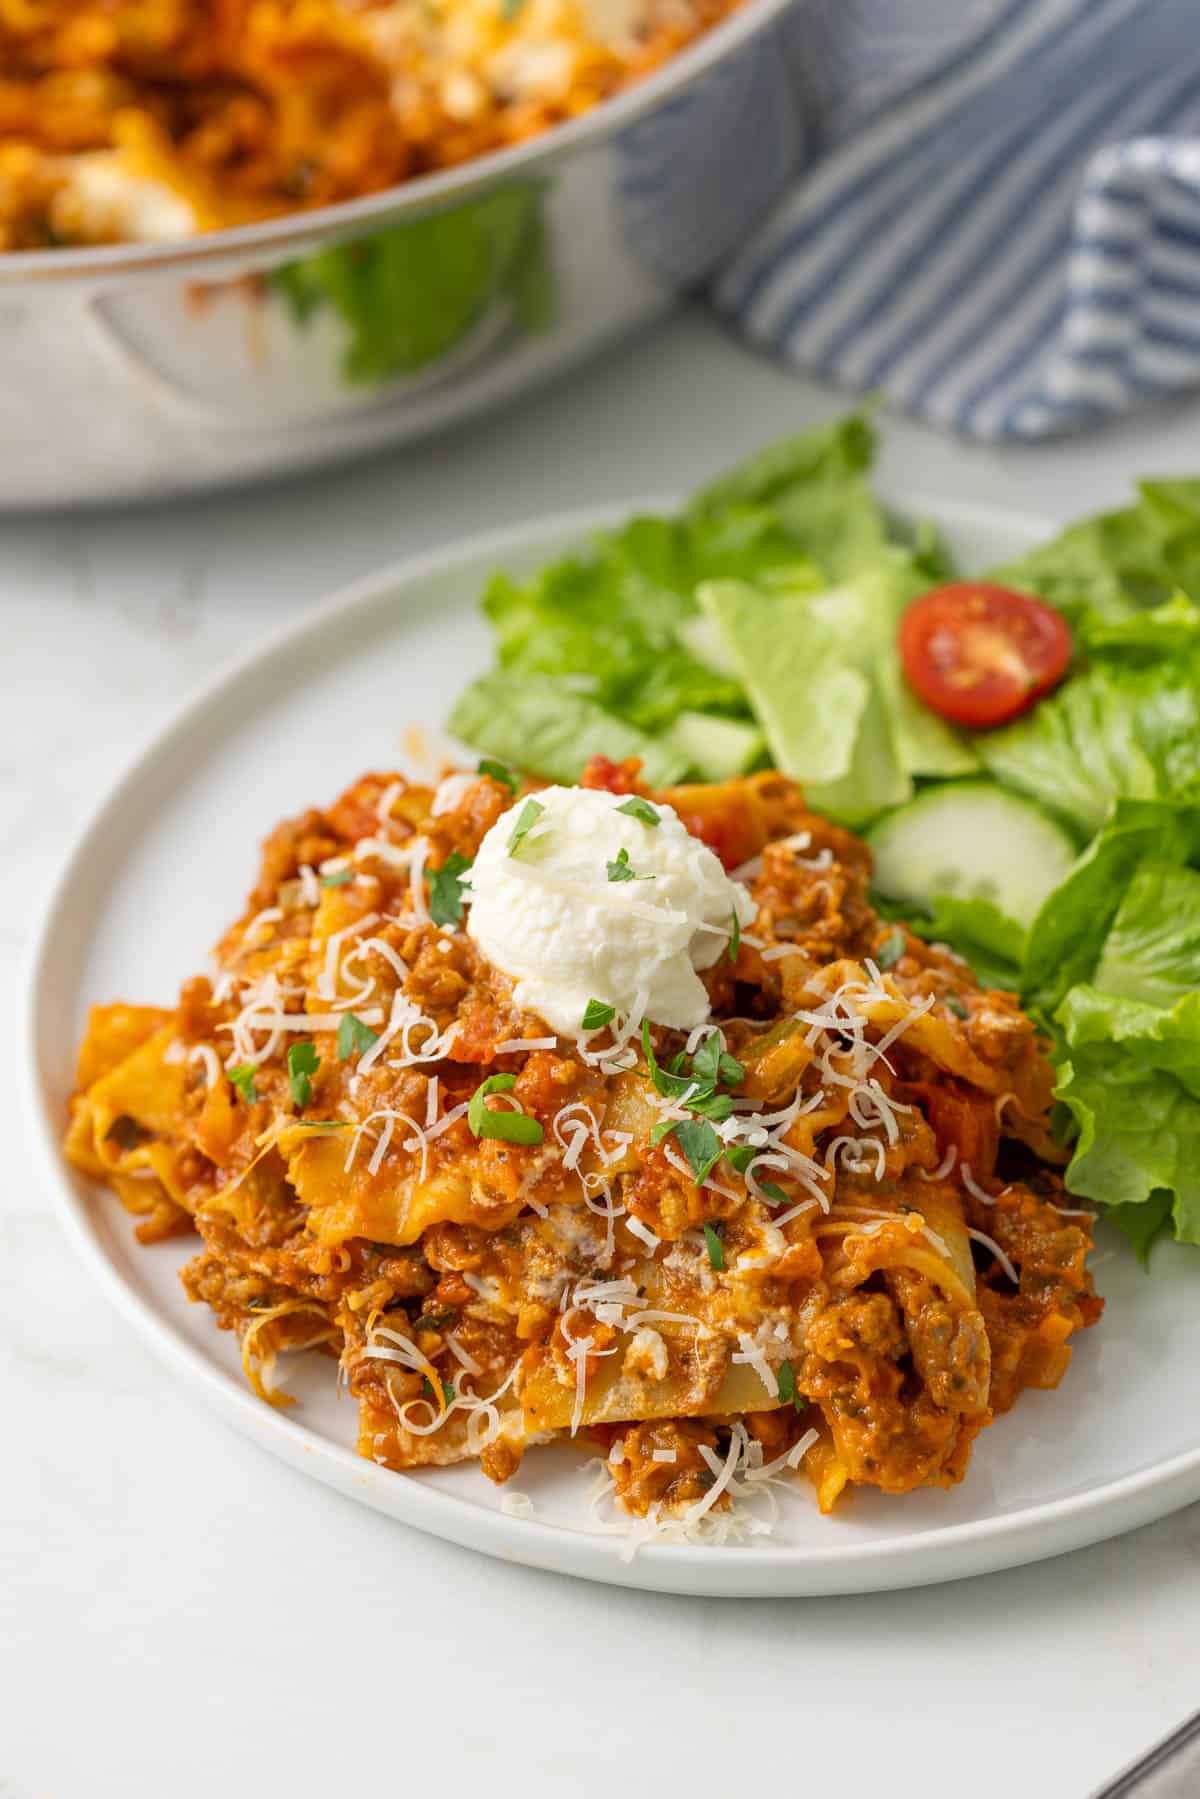 Skillet lasagna on a plate with a garden salad.